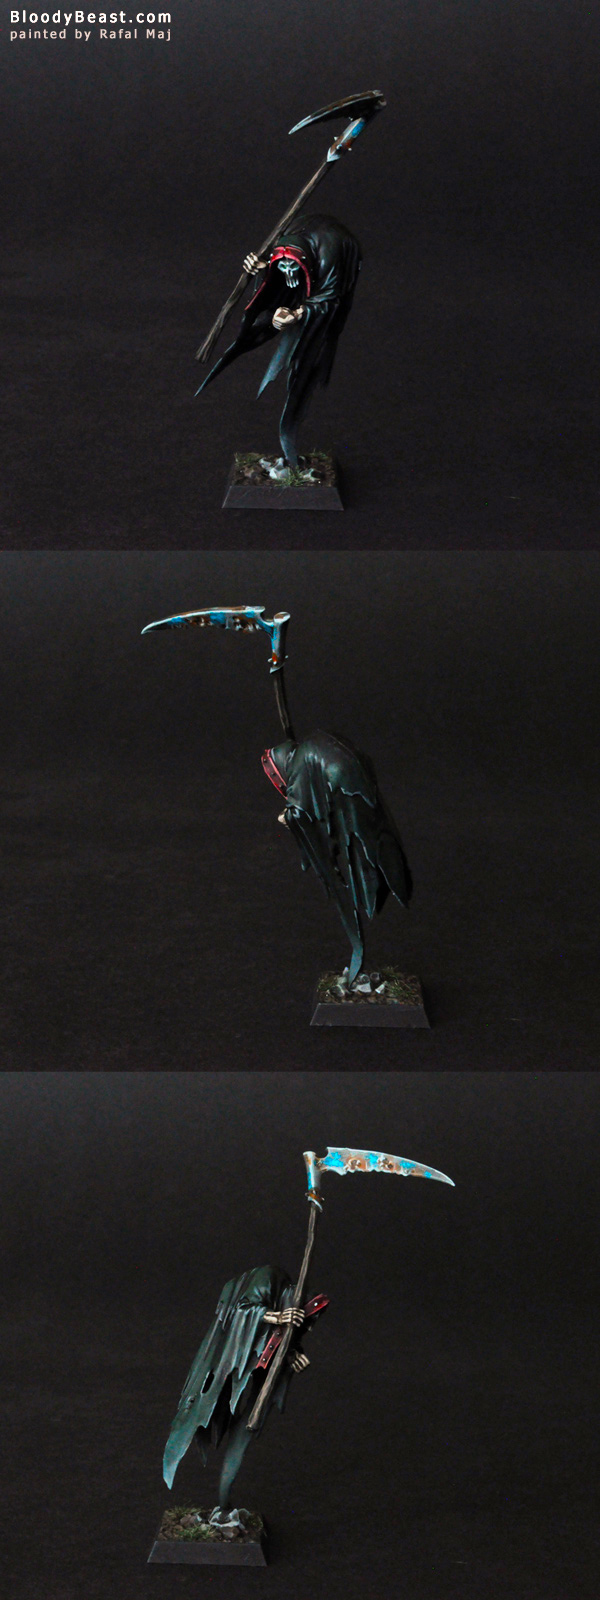 Vampire Counts Cairn Wraith painted by Rafal Maj (BloodyBeast.com)